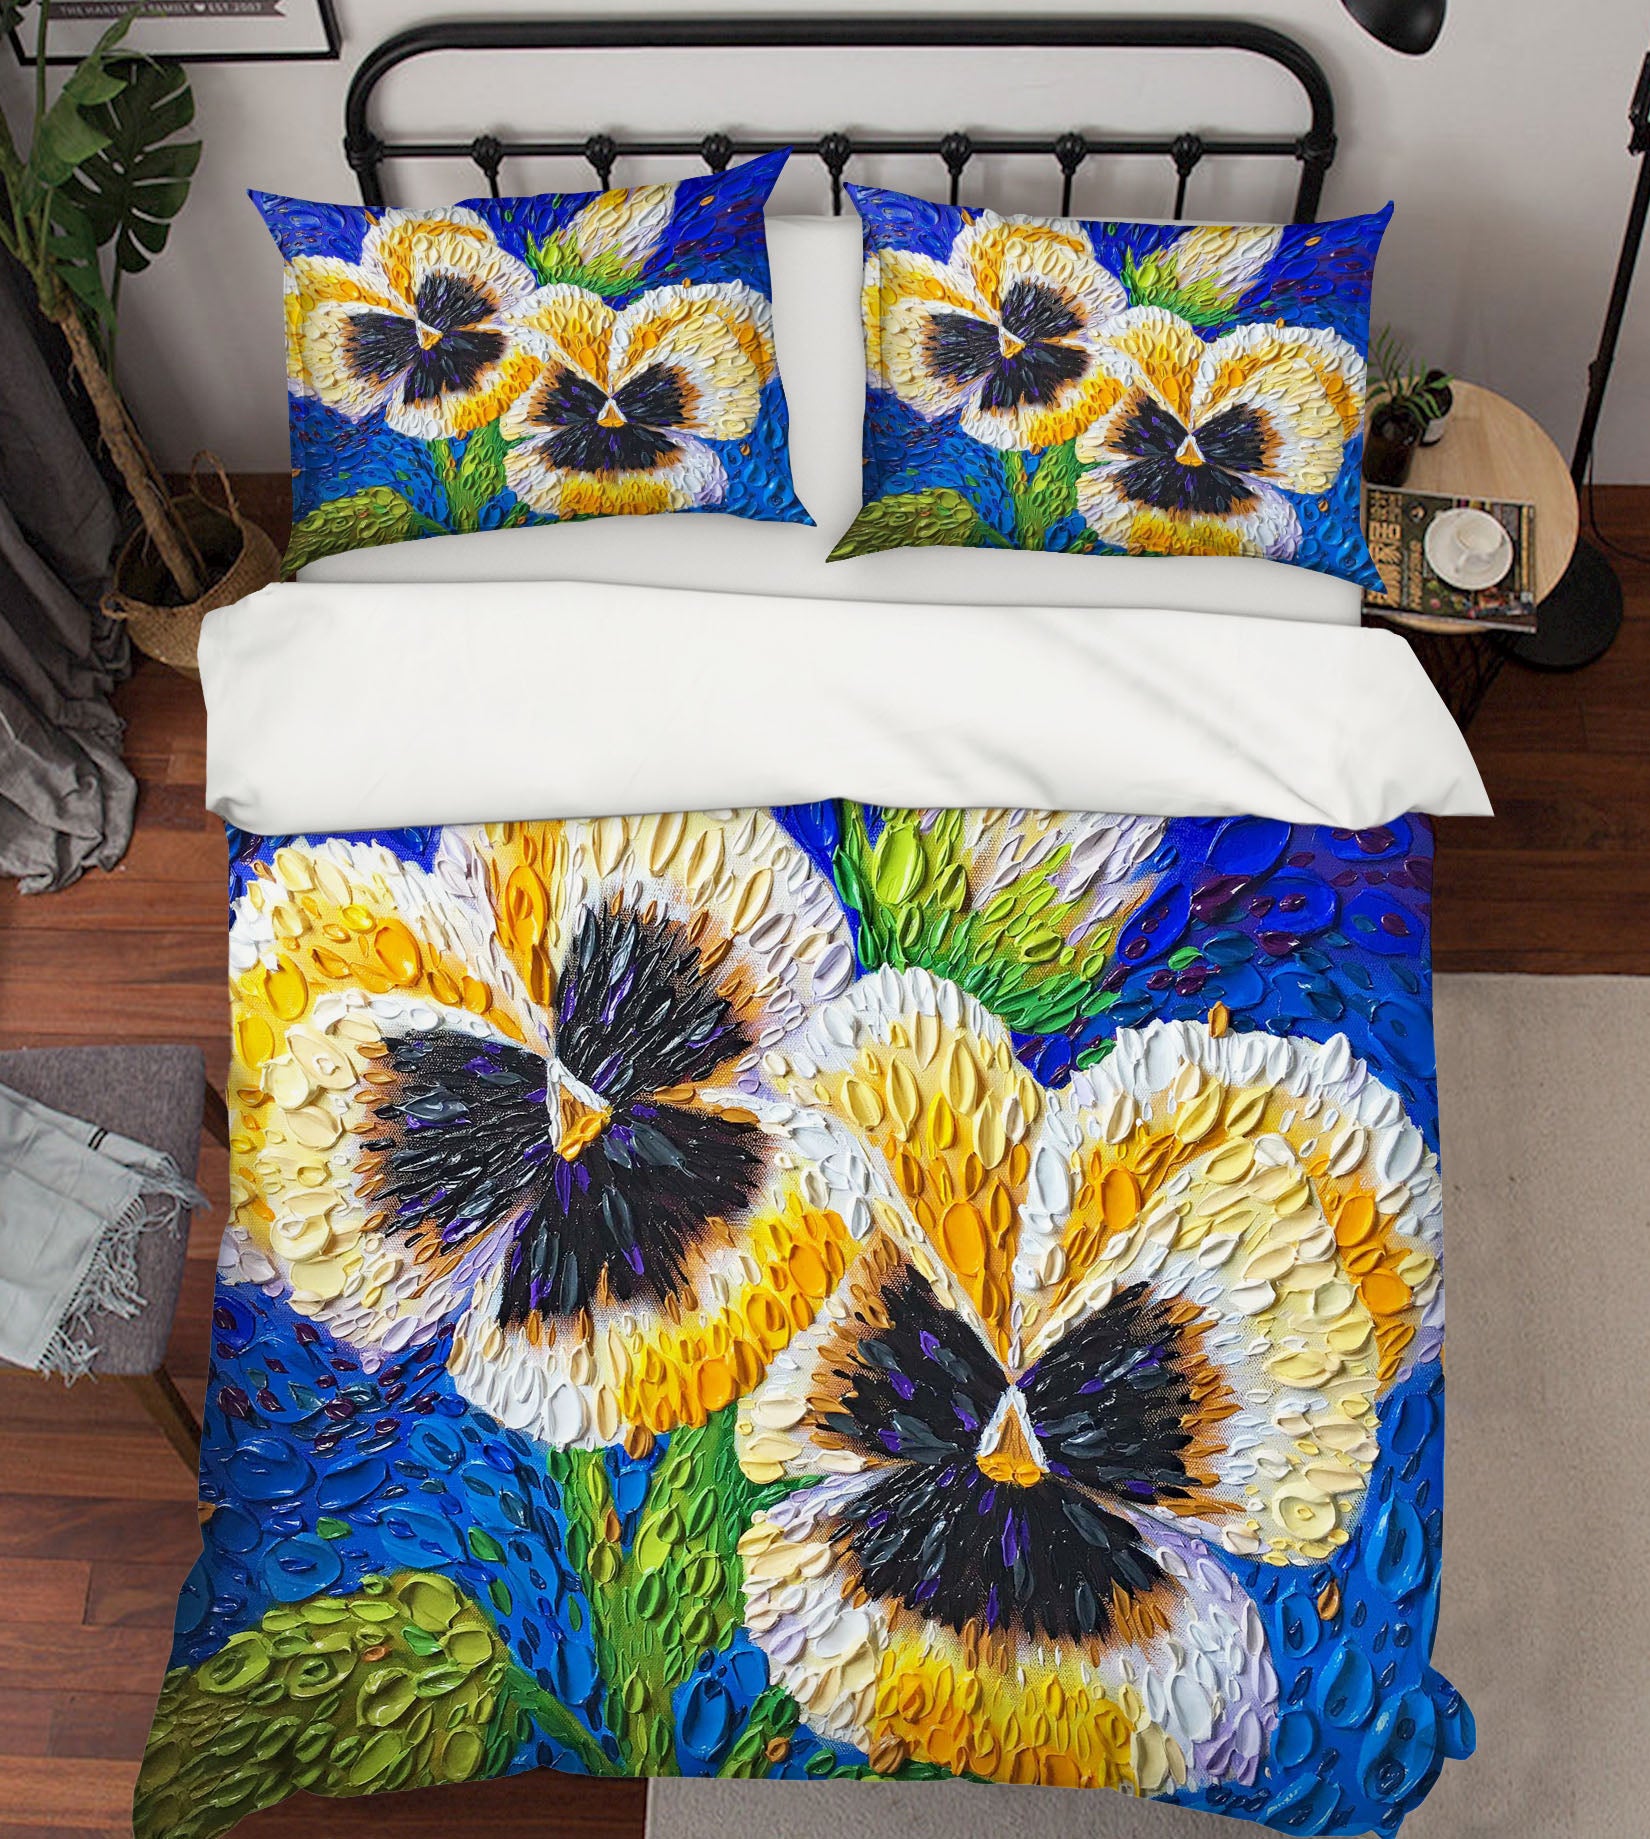 3D Pansy 2128 Dena Tollefson bedding Bed Pillowcases Quilt